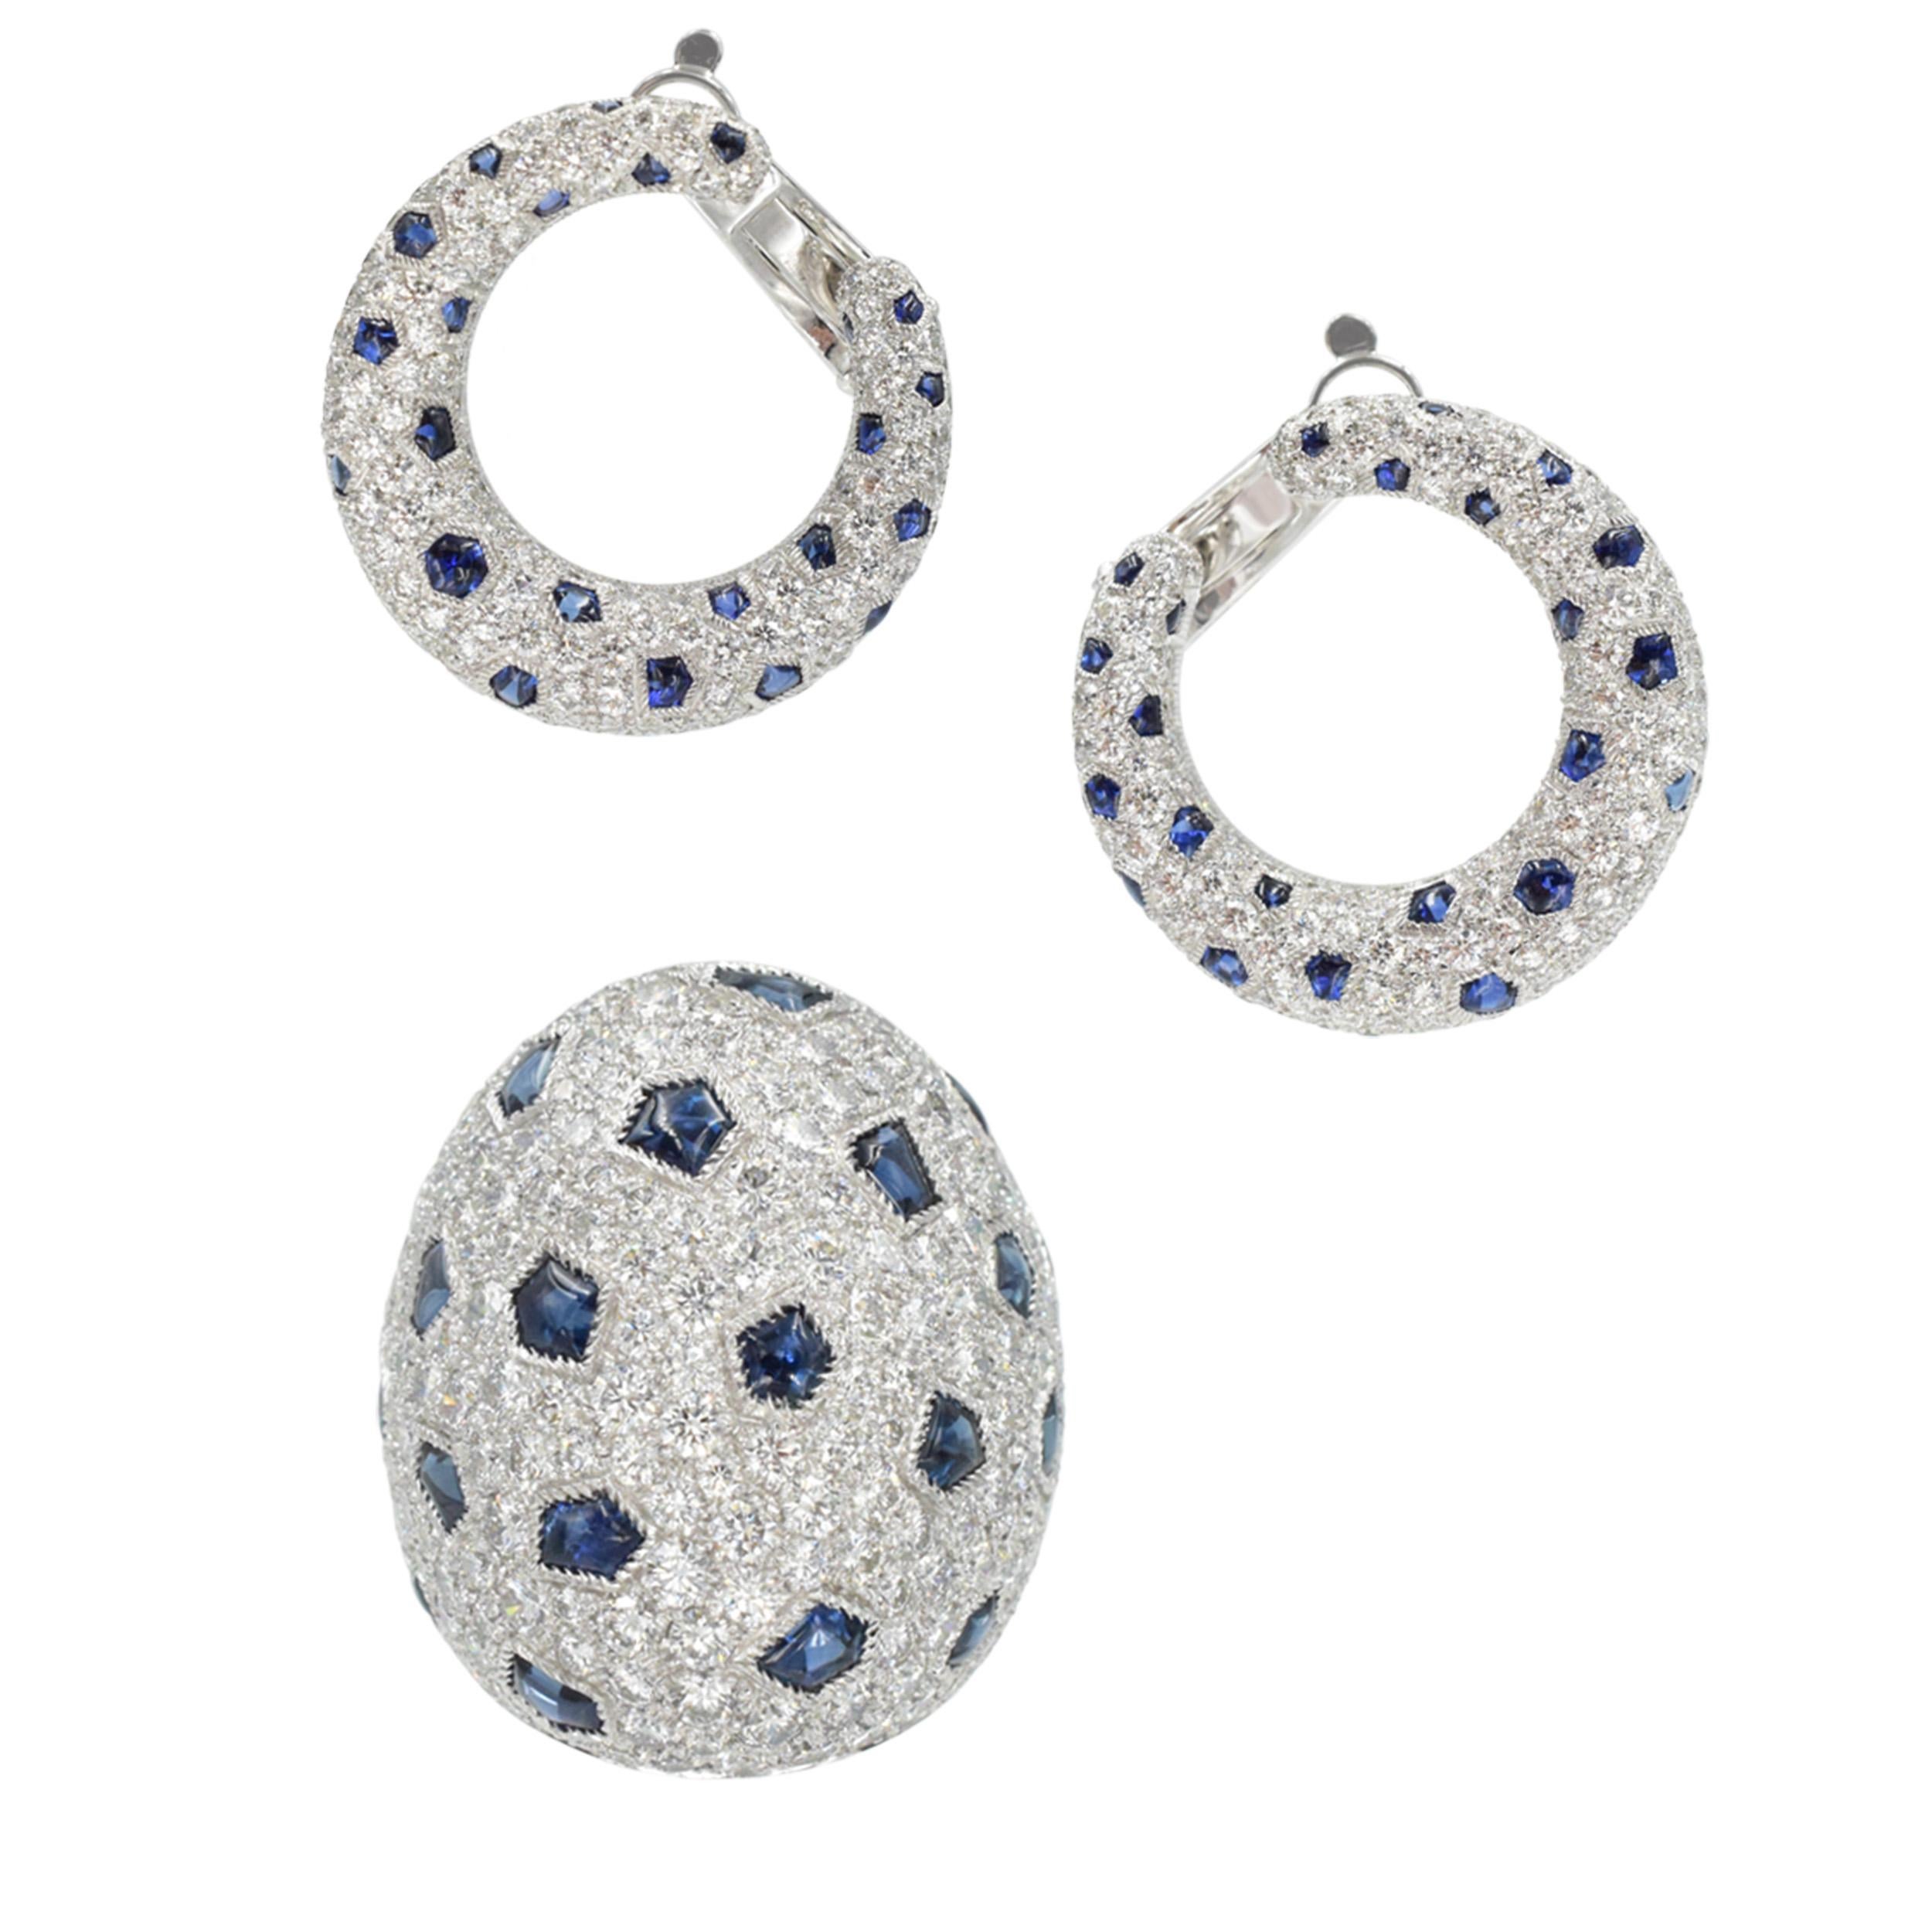 Cartier Creole diamond and sapphire  earrings in
platinum and matching 18k white gold ring. 
Circa 2000's. Cartier Creole diamond and sapphire hoop earrings in platinum. These earrings are set with total of approximately 5.0ct, . Accented with 46